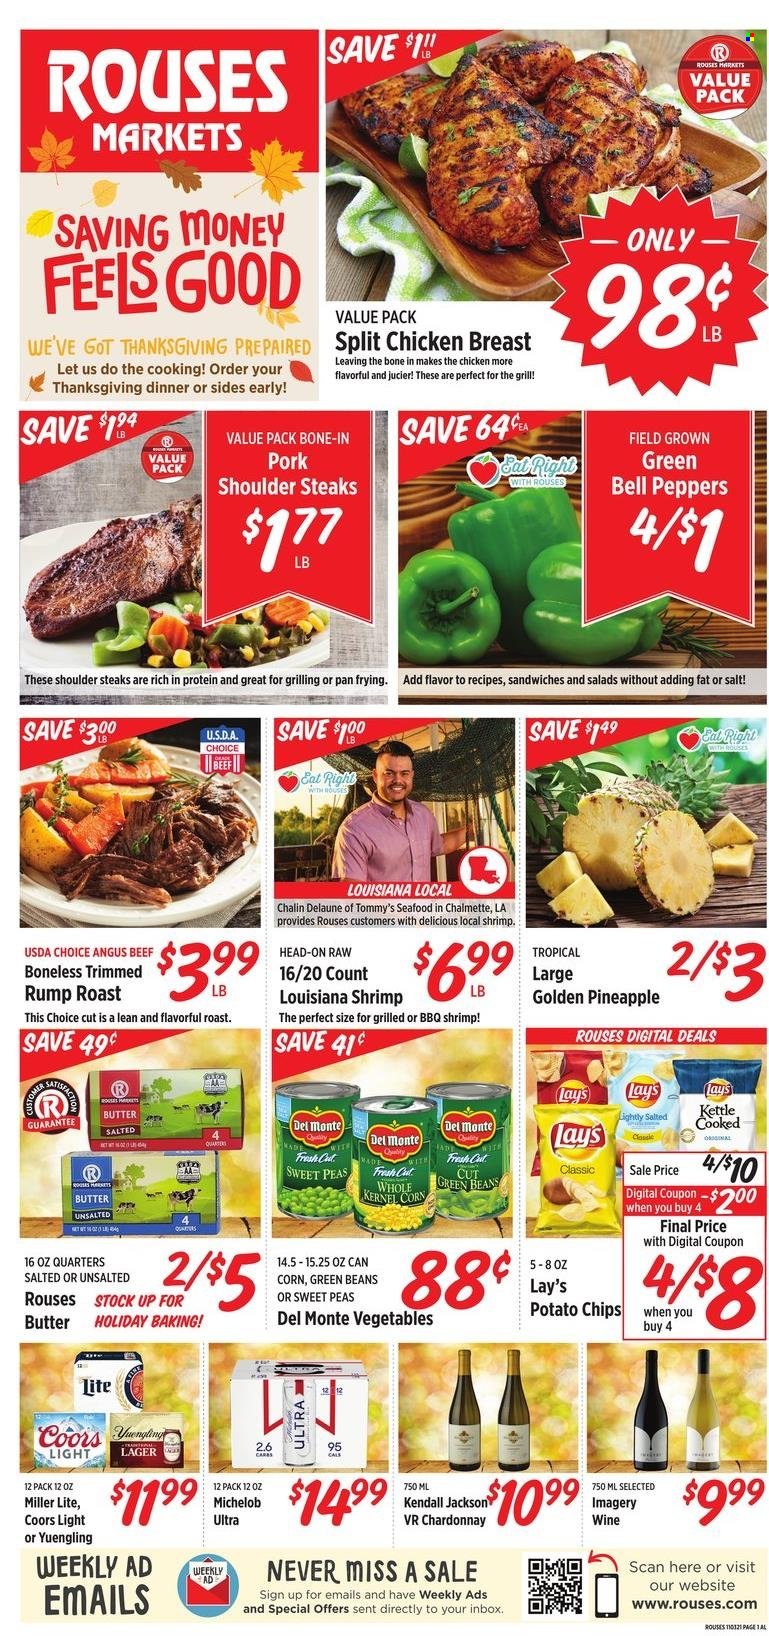 thumbnail - Rouses Markets Flyer - 11/03/2021 - 11/10/2021 - Sales products - beans, bell peppers, corn, green beans, peas, peppers, pineapple, seafood, shrimps, butter, potato chips, chips, Lay’s, white wine, Chardonnay, wine, beer, Lager, chicken breasts, beef meat, steak, pork meat, pork shoulder, Miller Lite, Coors, Yuengling, Michelob. Page 1.